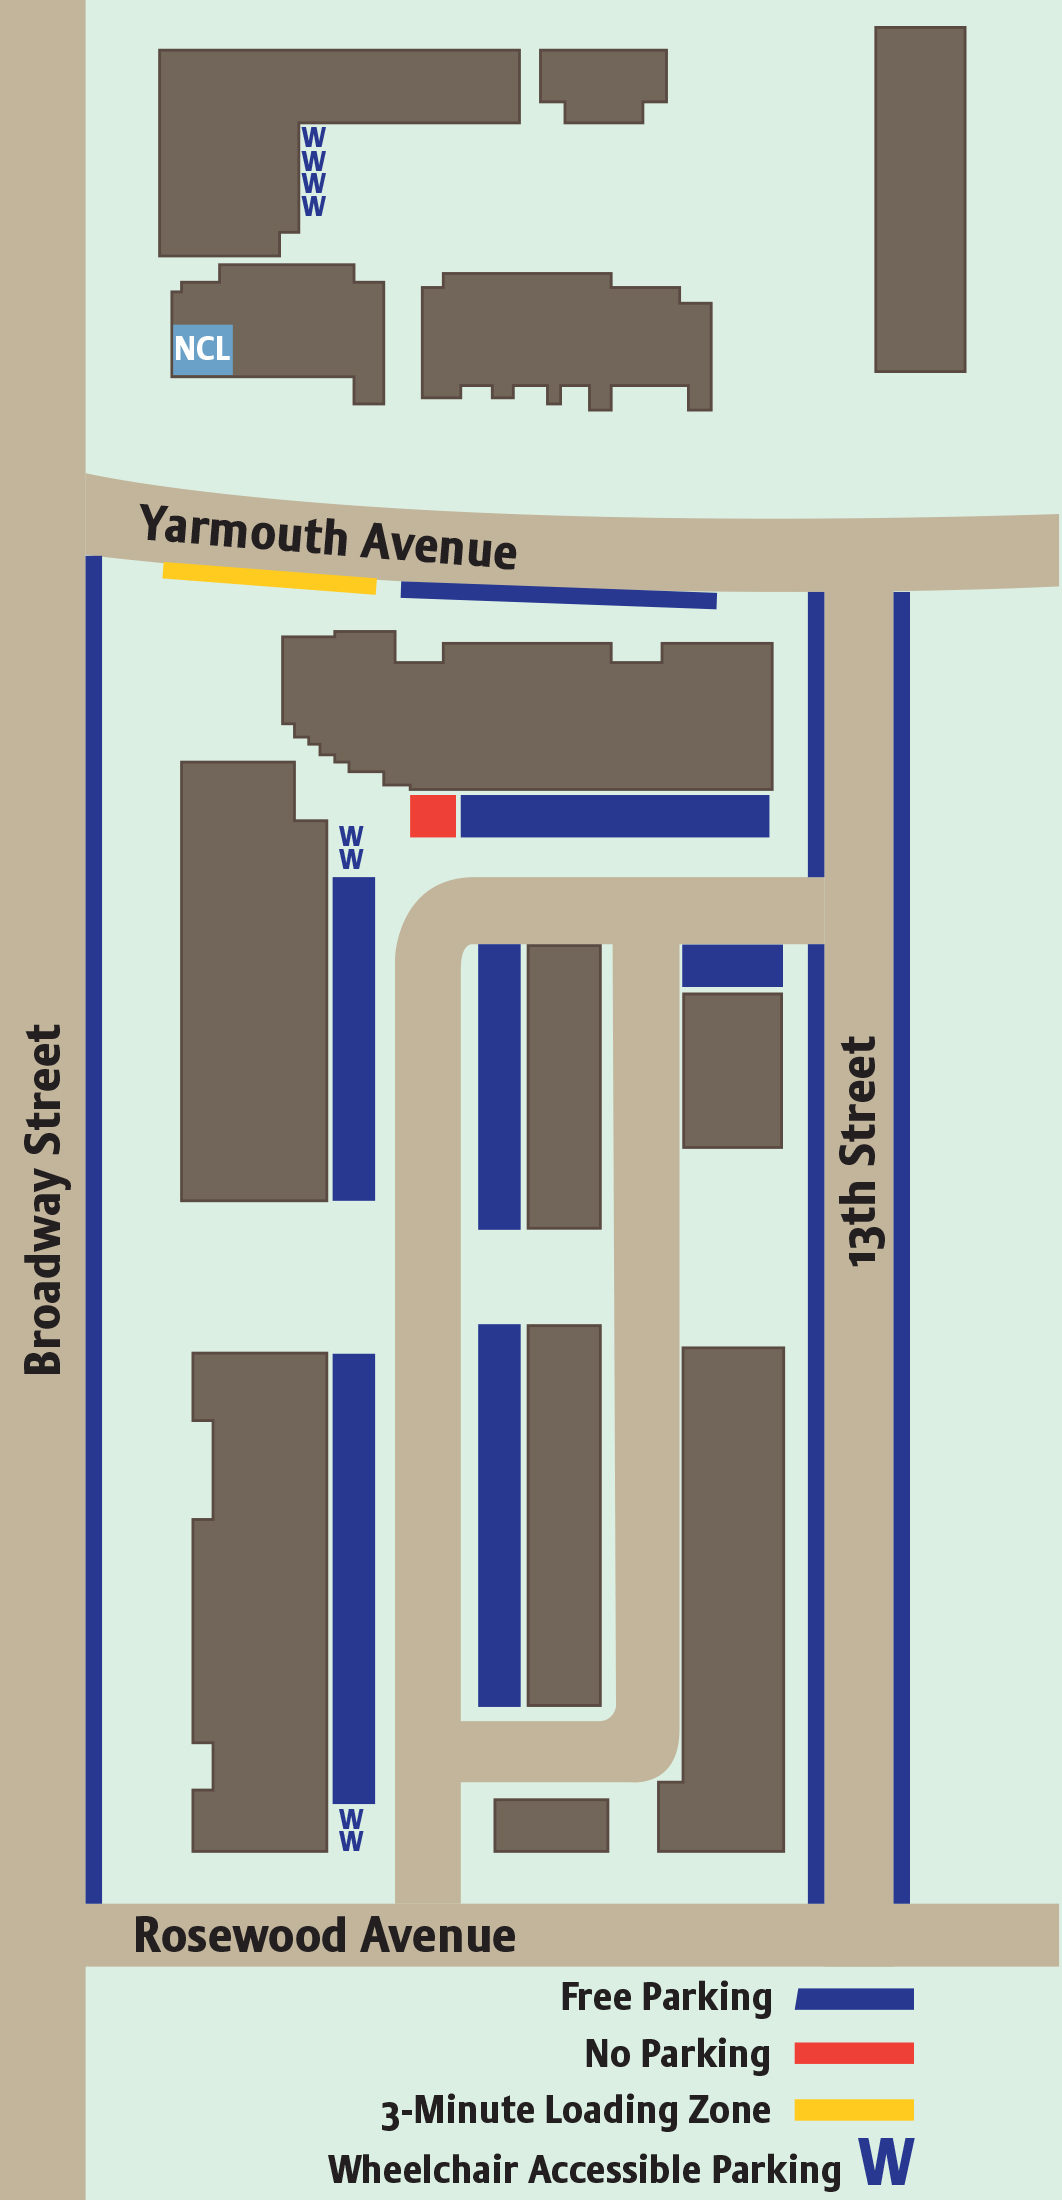 Map showing intersection of Broadway, Yarmouth and 13th Street for parking options